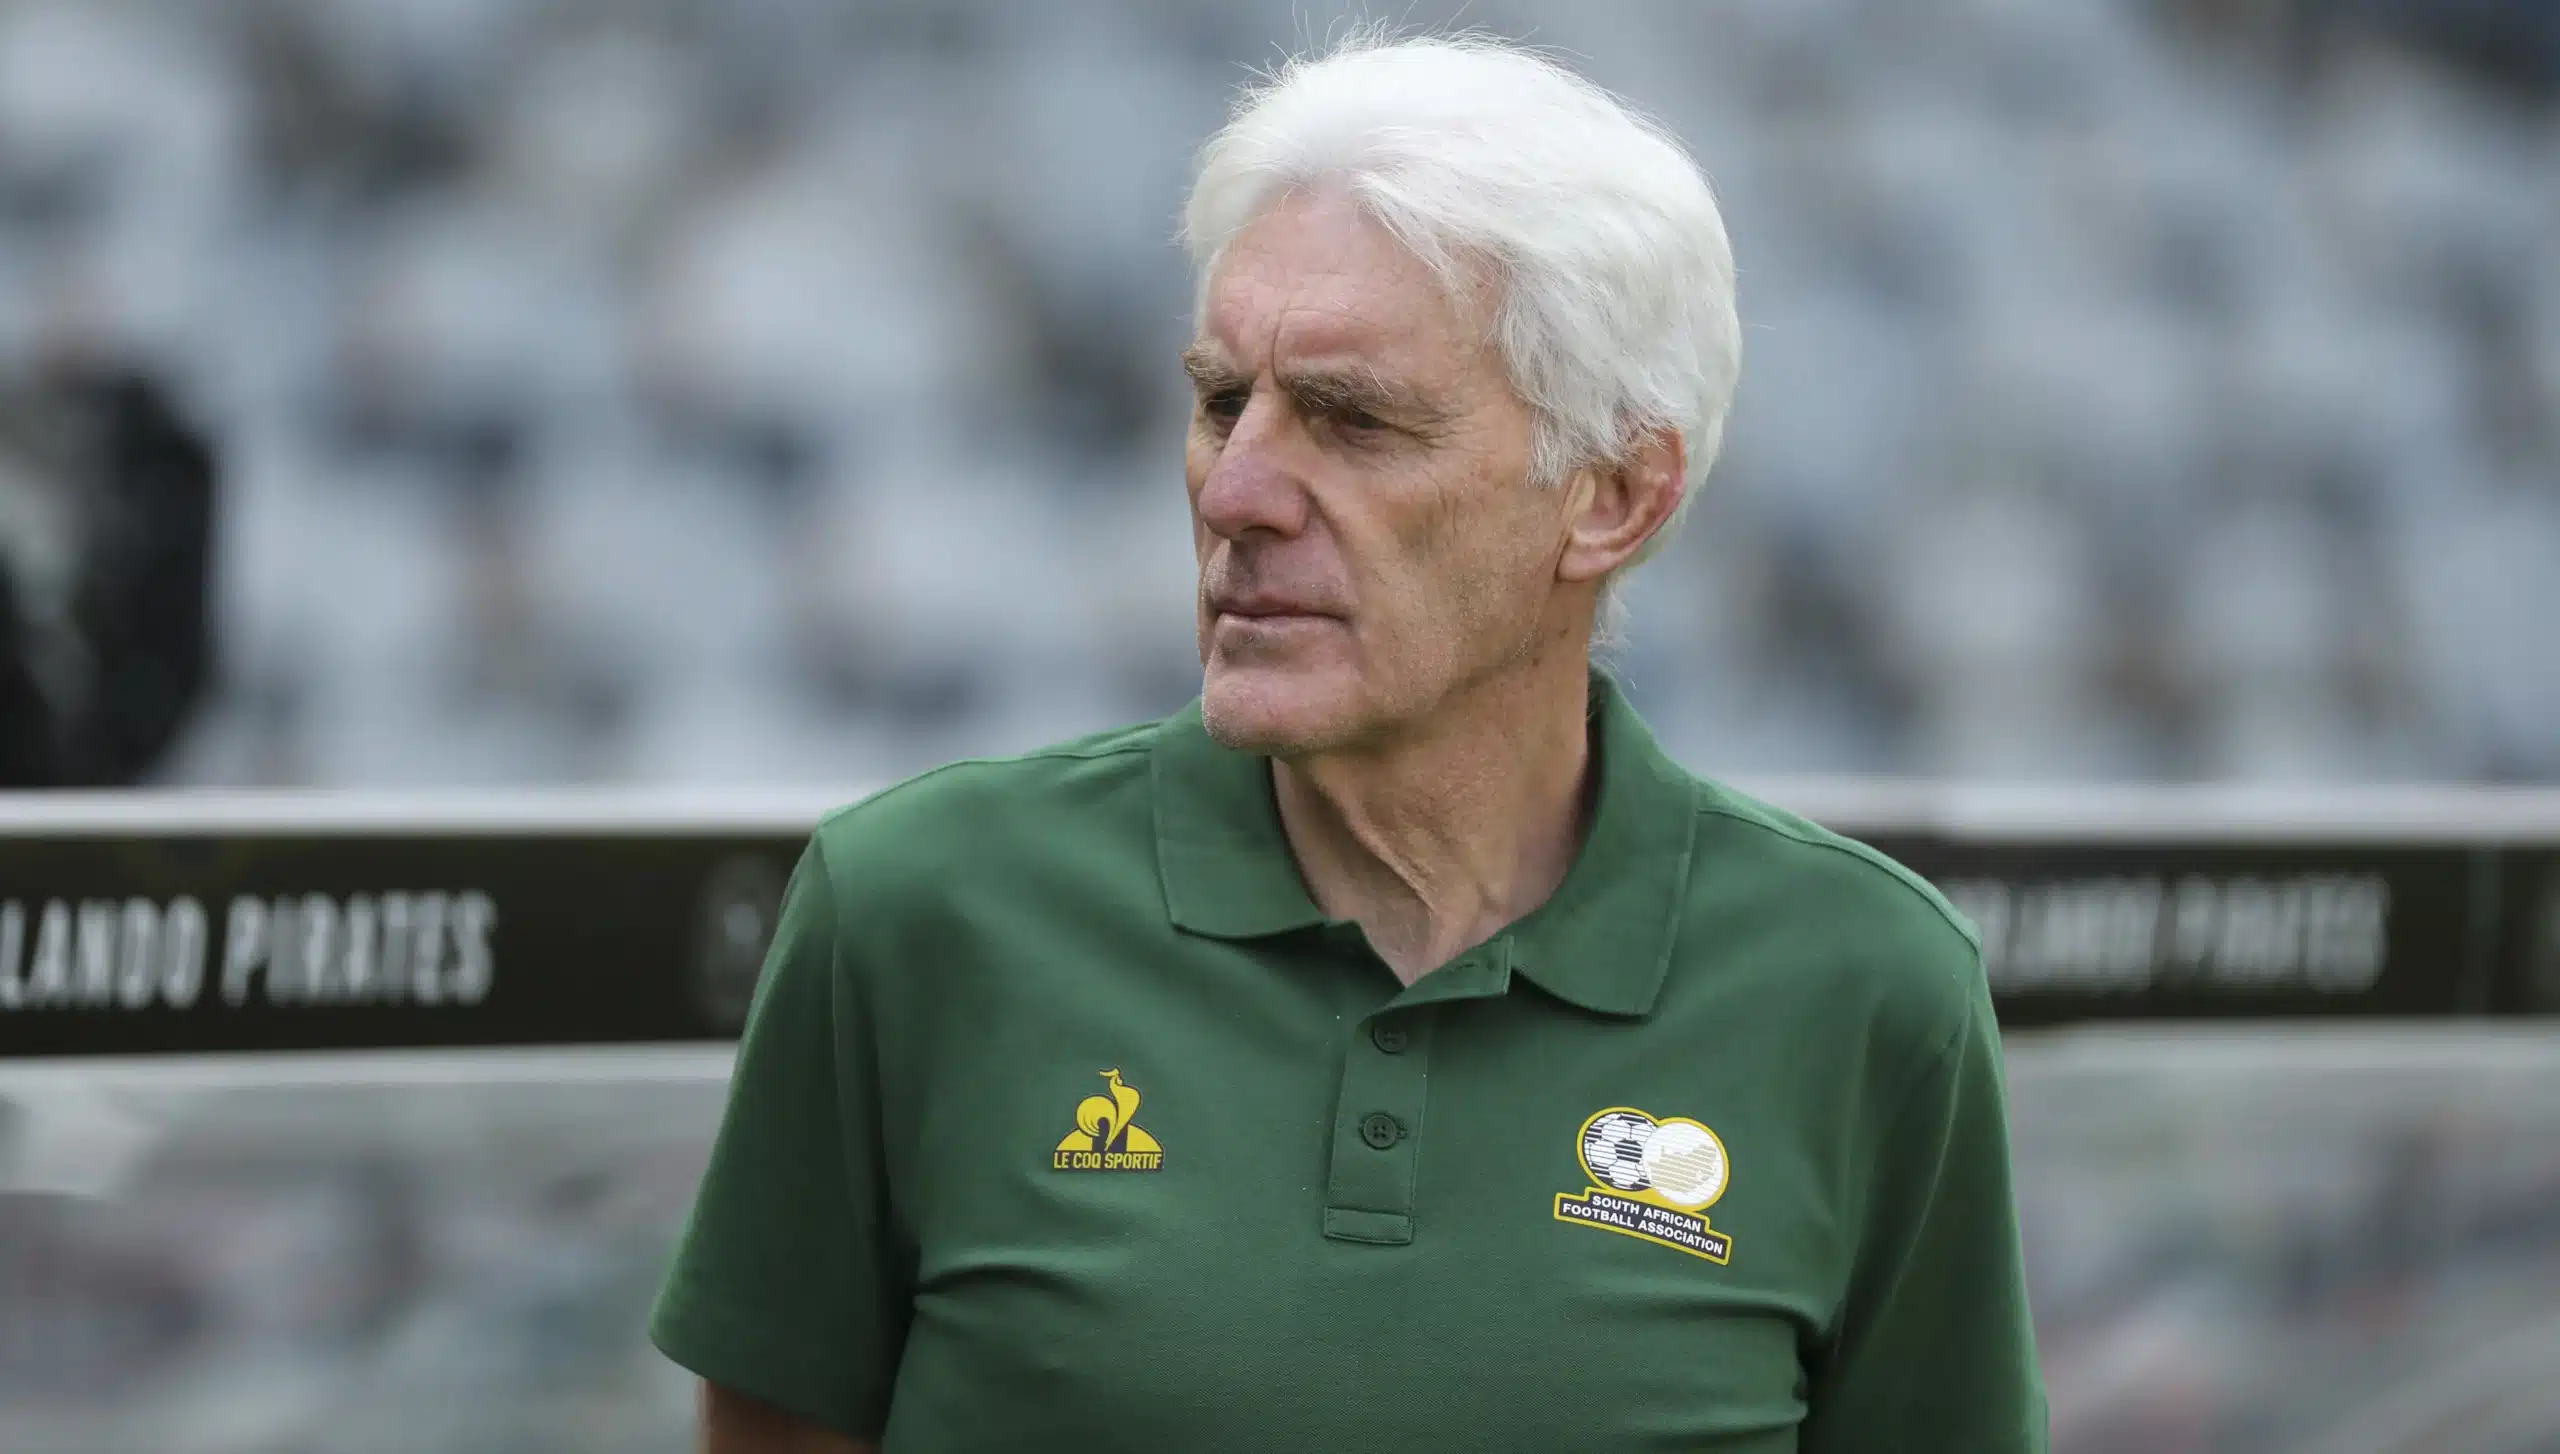 South African coach names Nigerian player who needs to be stopped from reaching AFCON final